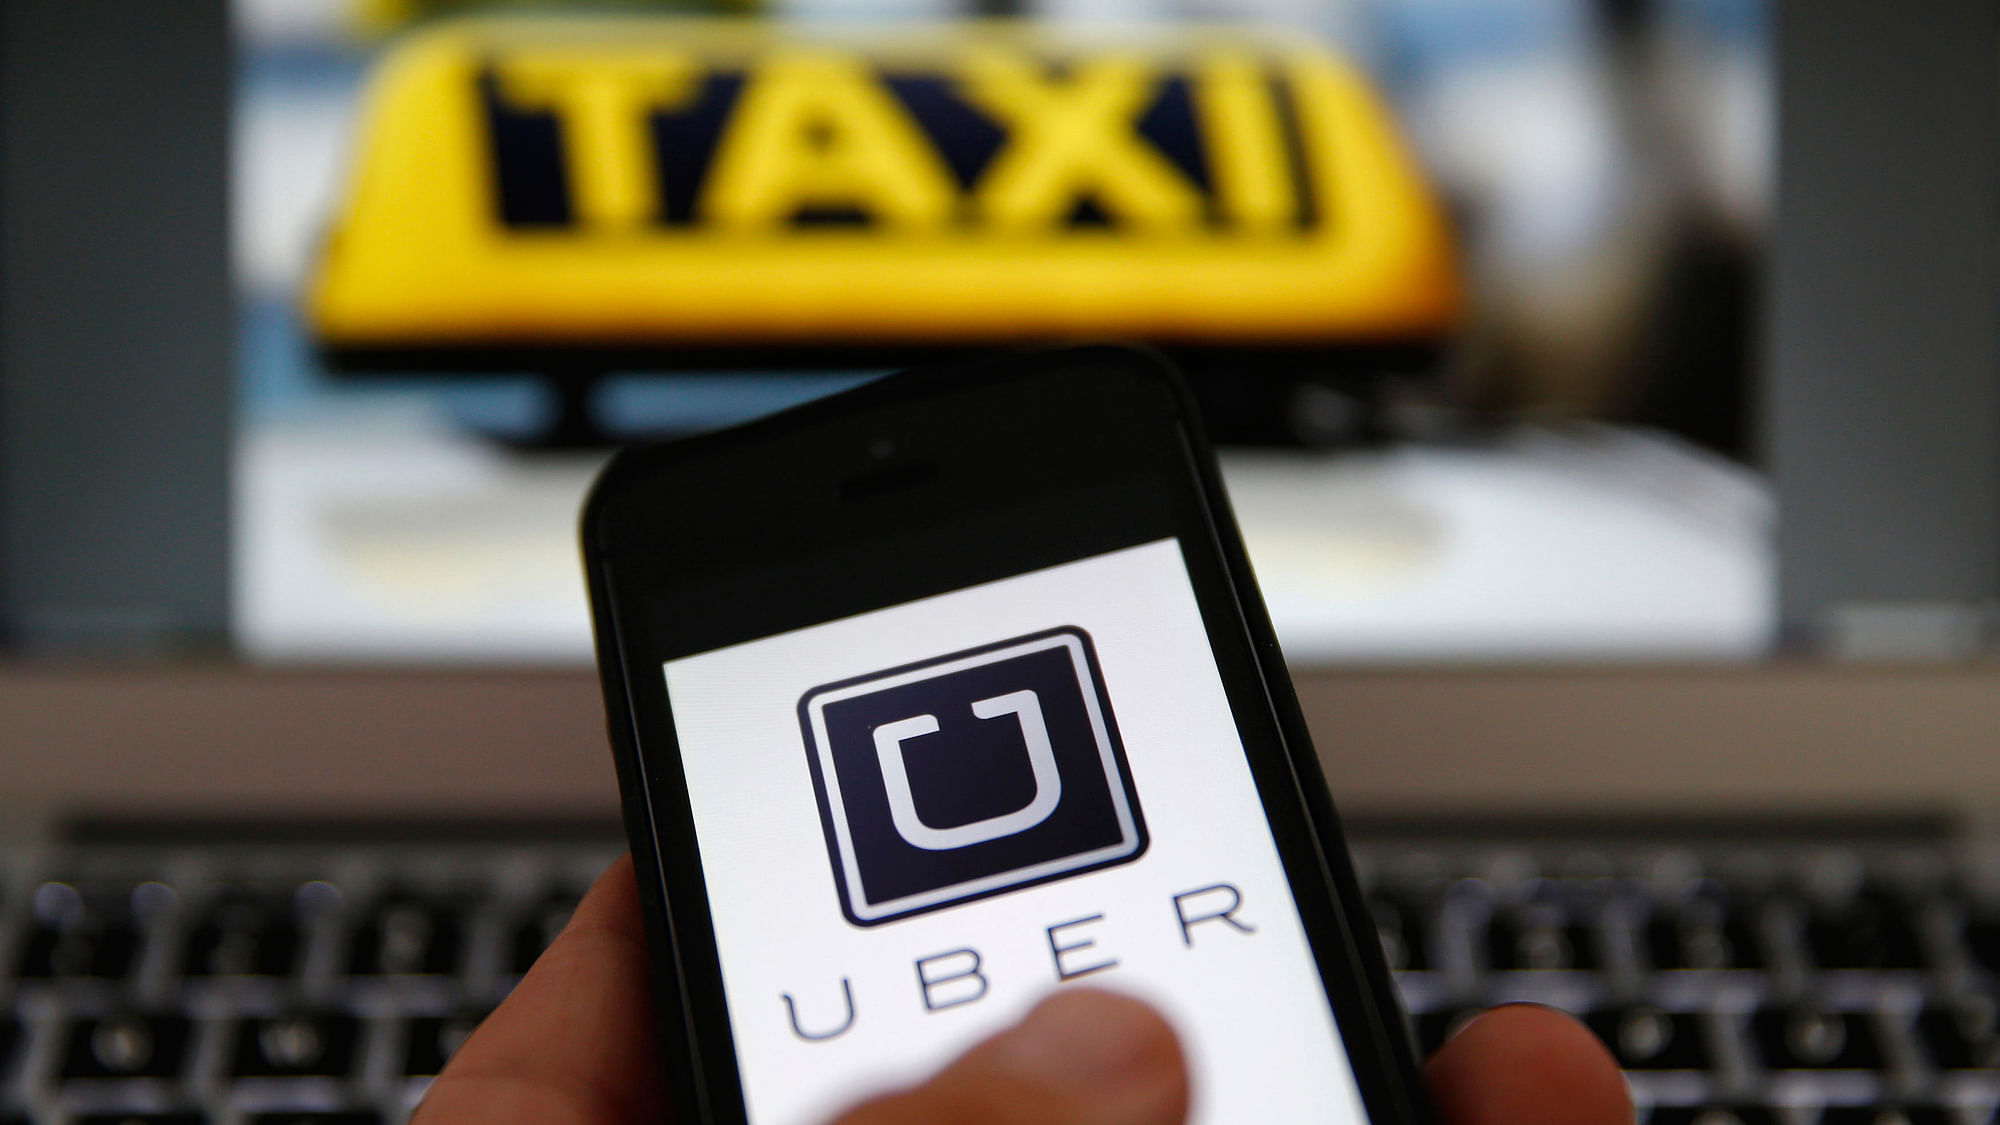 A UK court ruled drivers for the taxi app firm should be treated as workers rather than independent contractors.